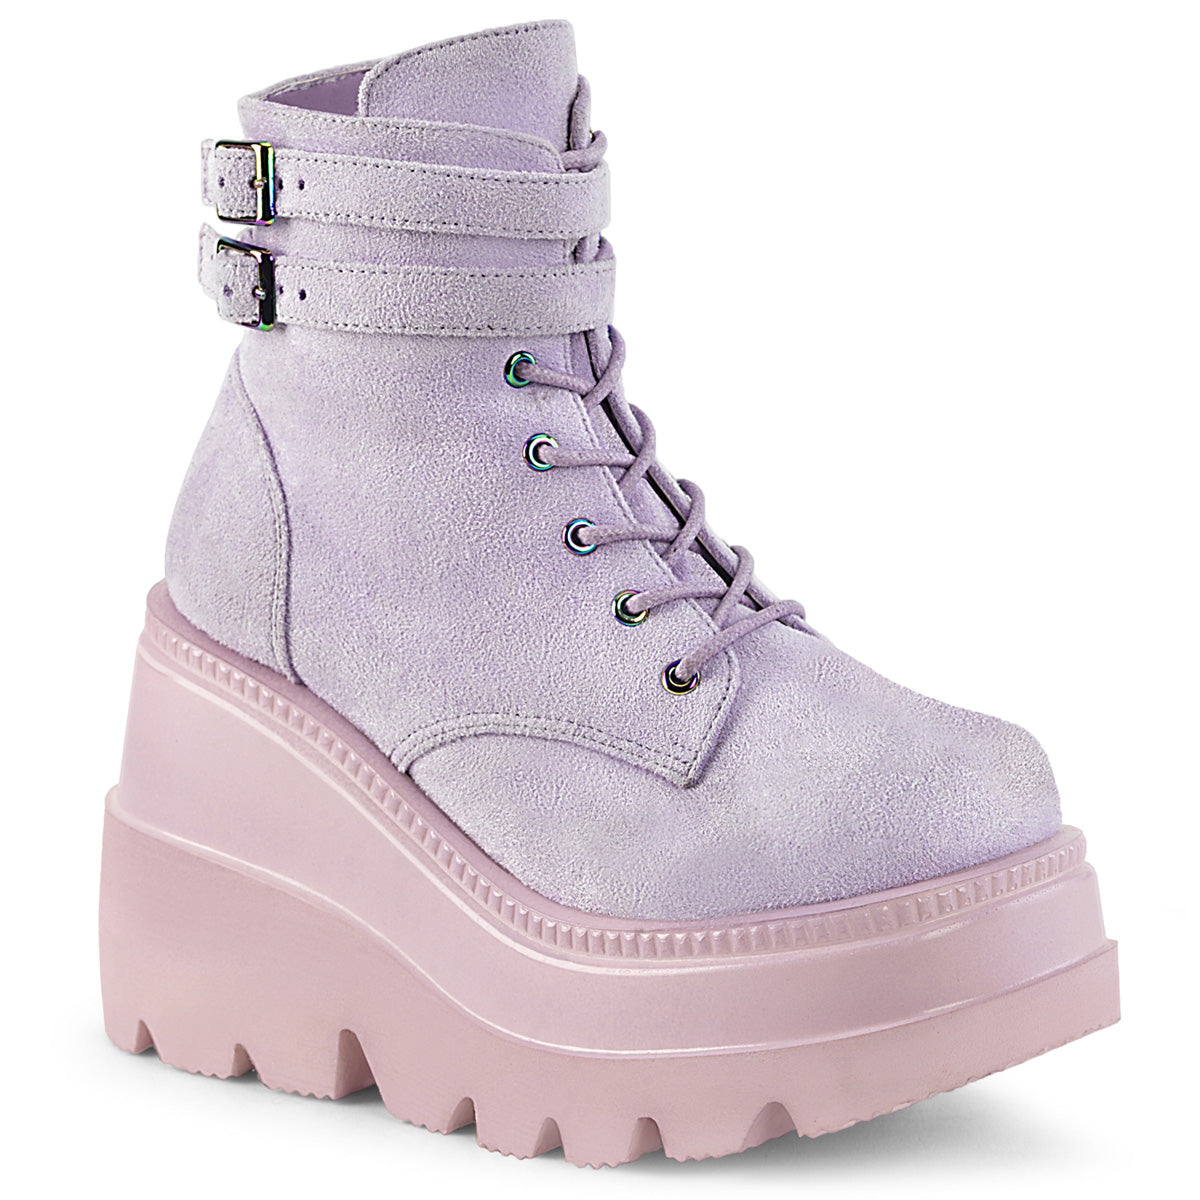 SHAKER-52 Lavender Suede Ankle Boots